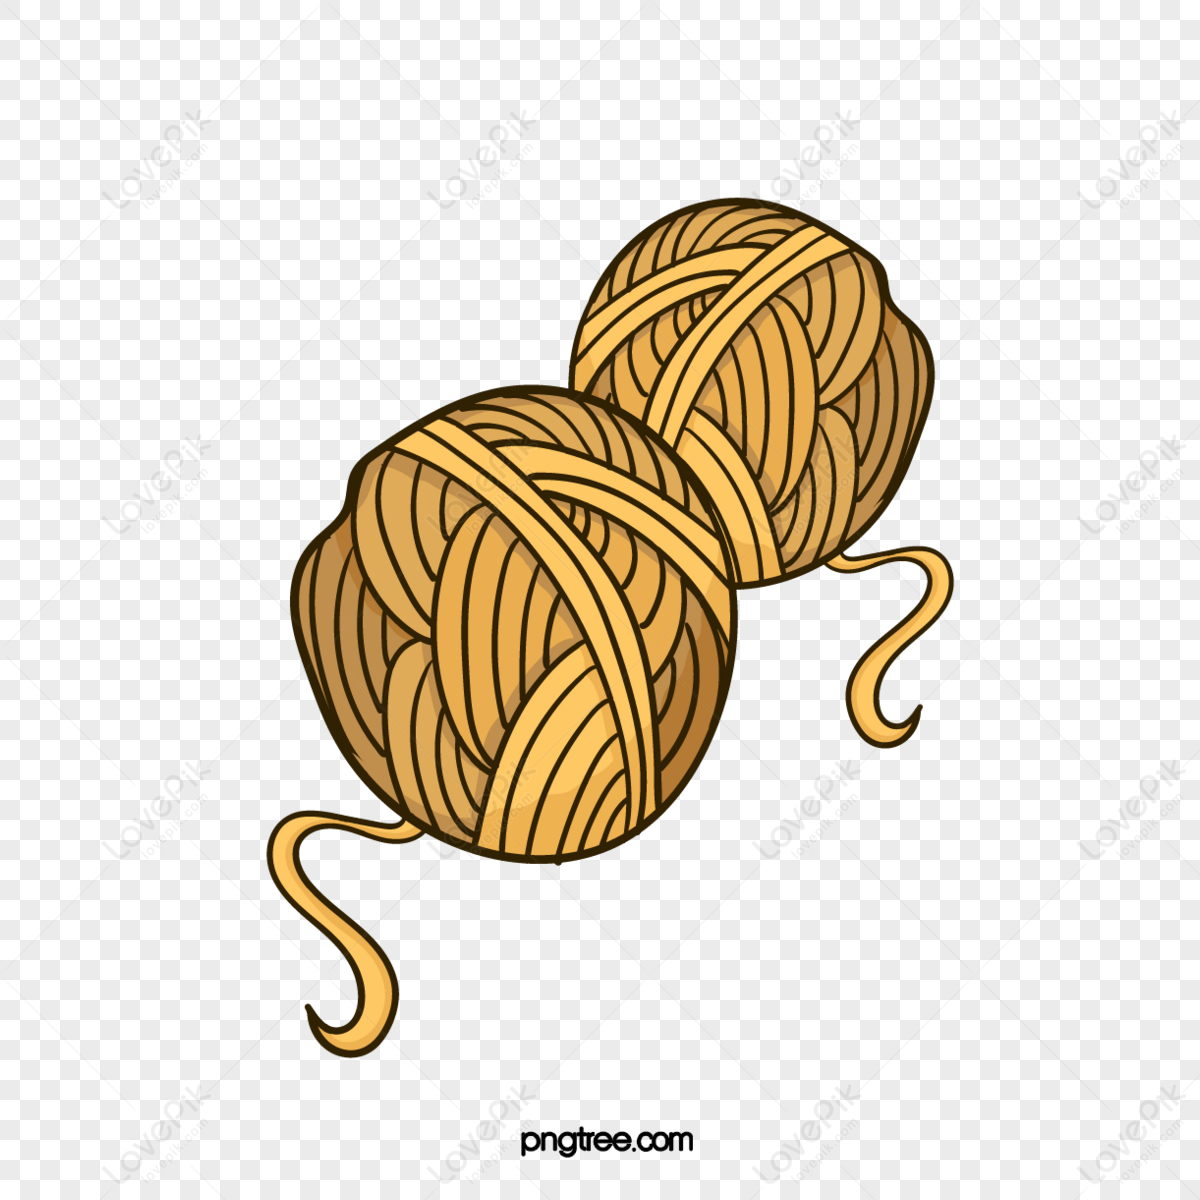 Ball of yarn clipart. Free download transparent .PNG